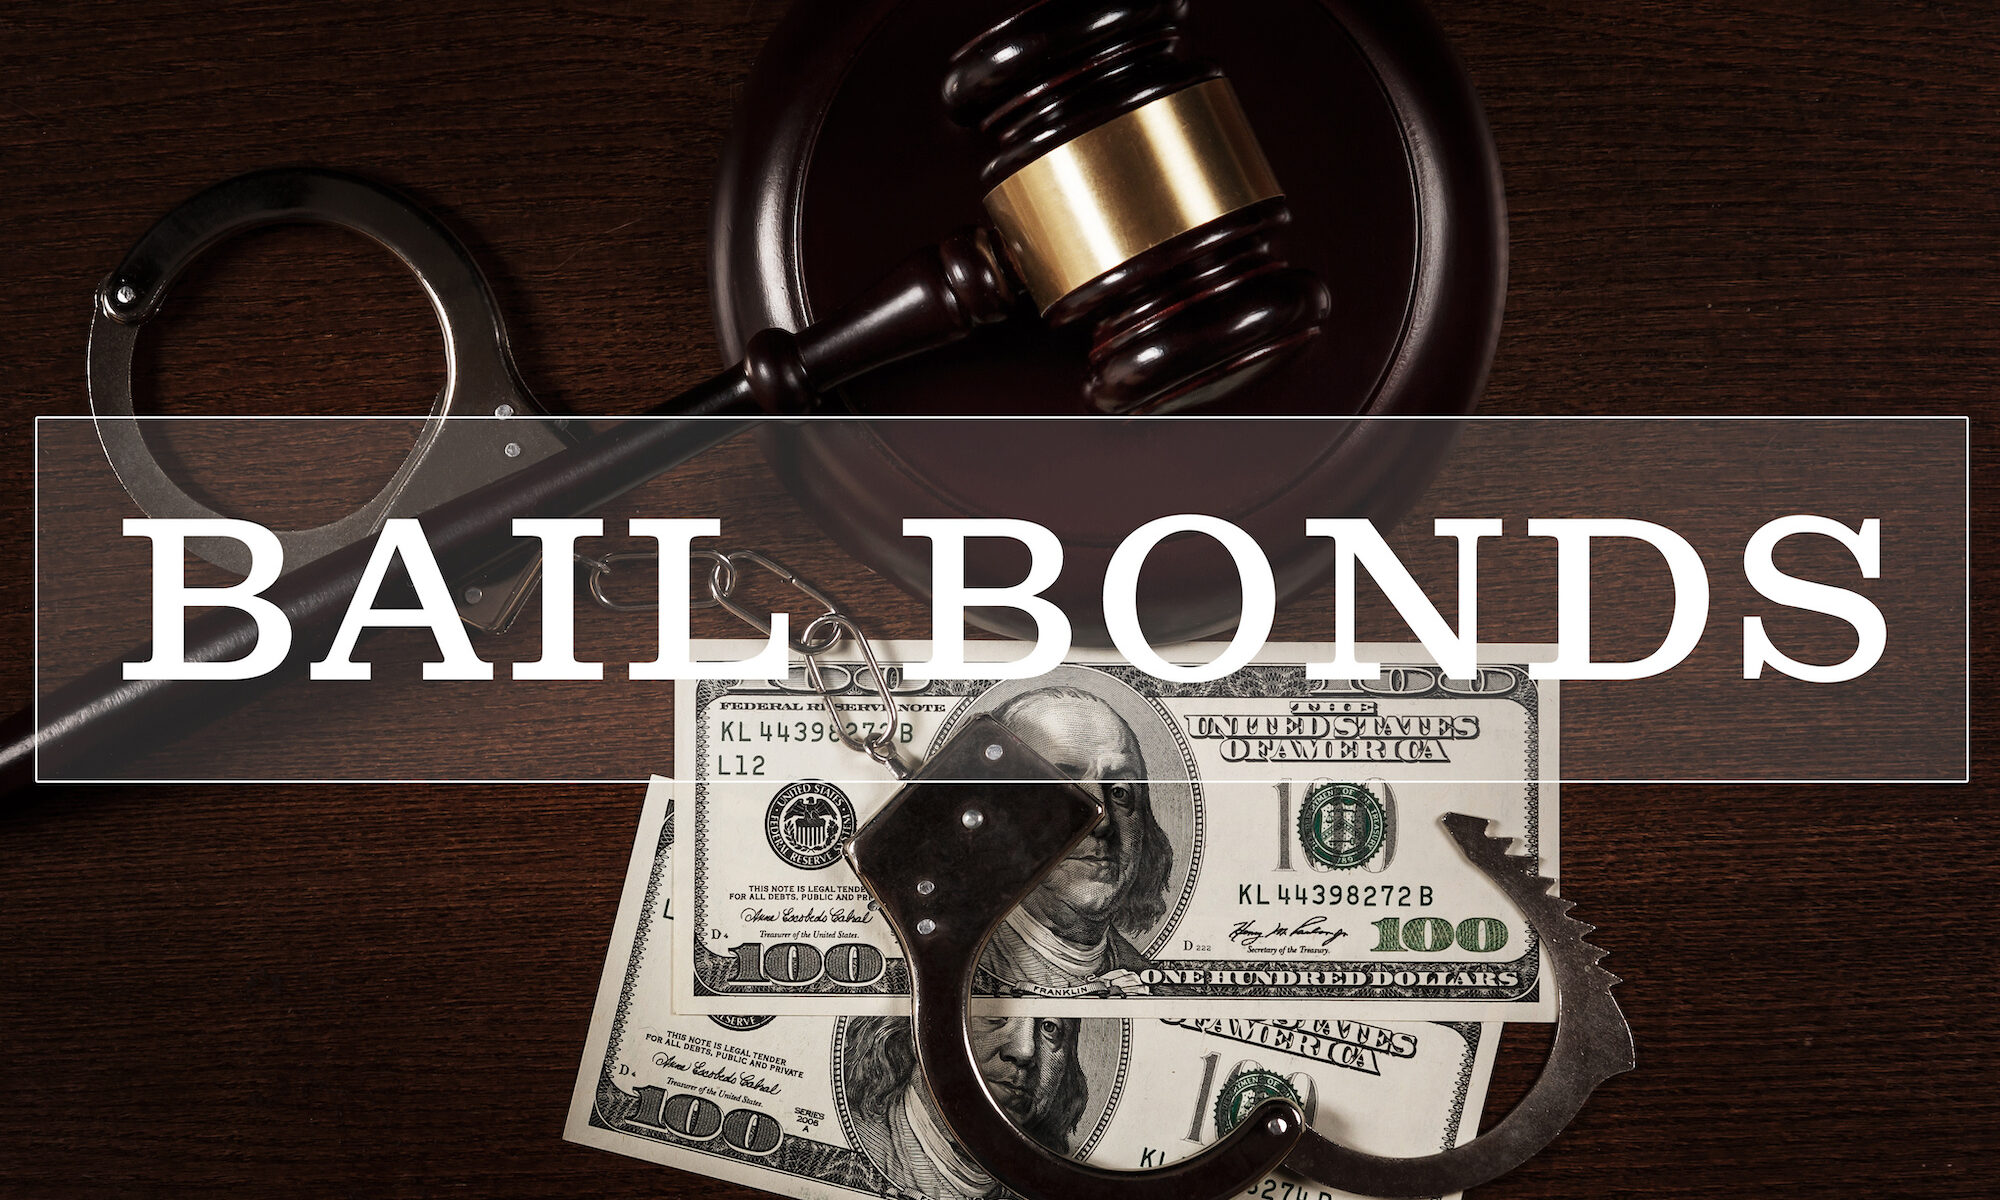 Bail bonds superimposed over an image displaying a gavel, handcuffs, and two 100 dollar bills